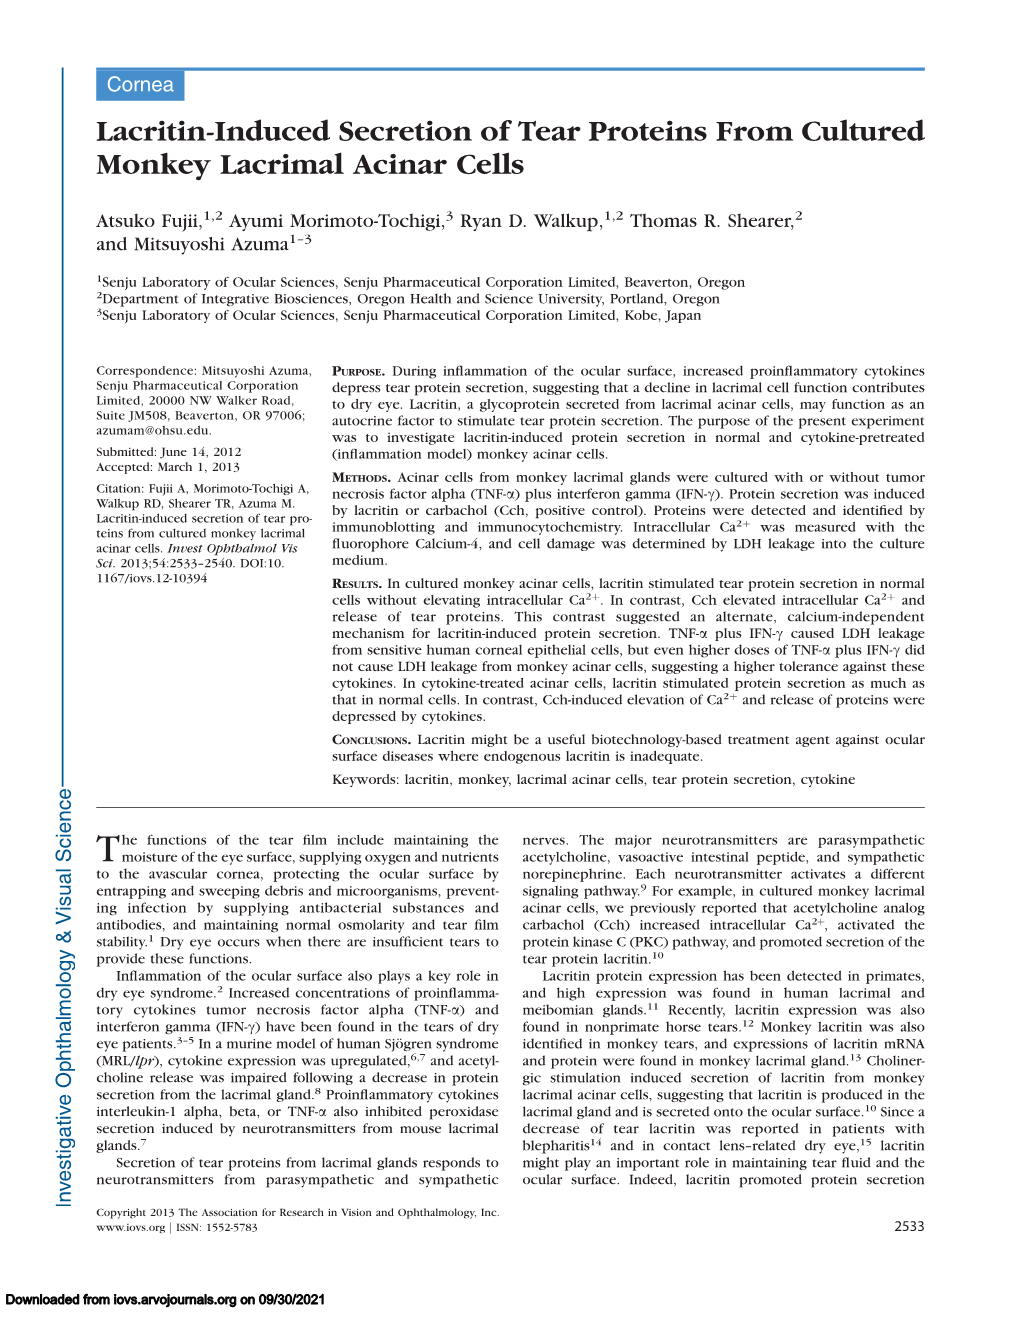 Lacritin-Induced Secretion of Tear Proteins from Cultured Monkey Lacrimal Acinar Cells